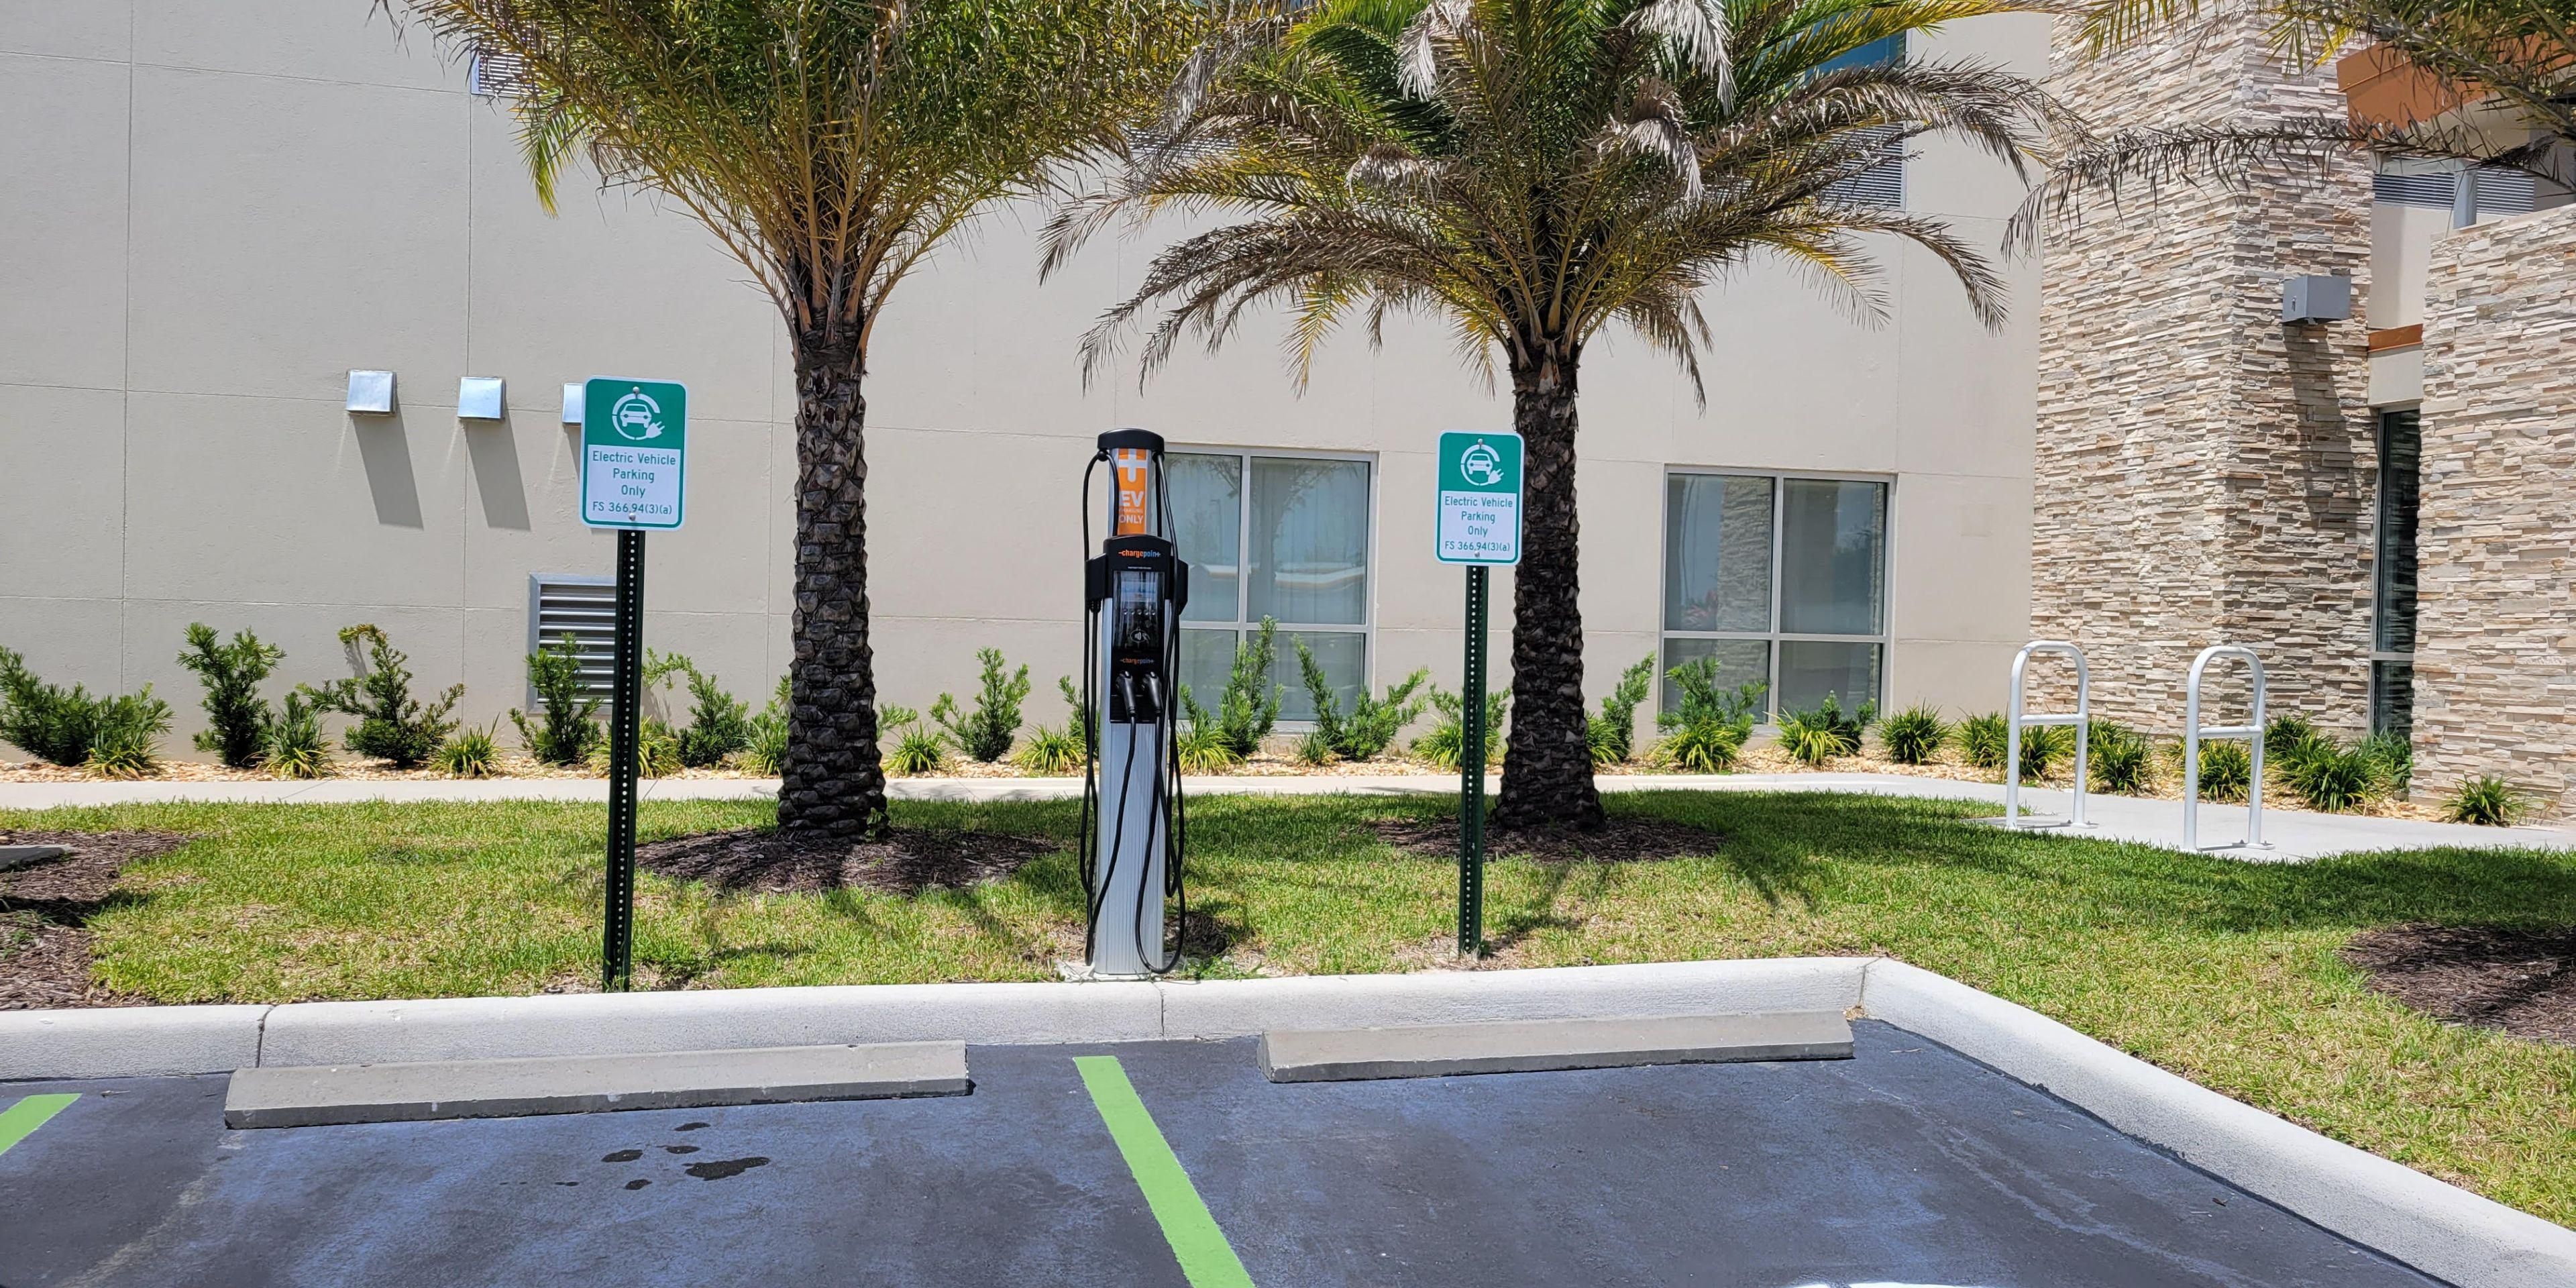 Charge up your electric vehicle at one of our two charging stations. We also have boat charging available too! We are the only hotel in the area that offers these amenities. Call us today and we'll tell you all about it!